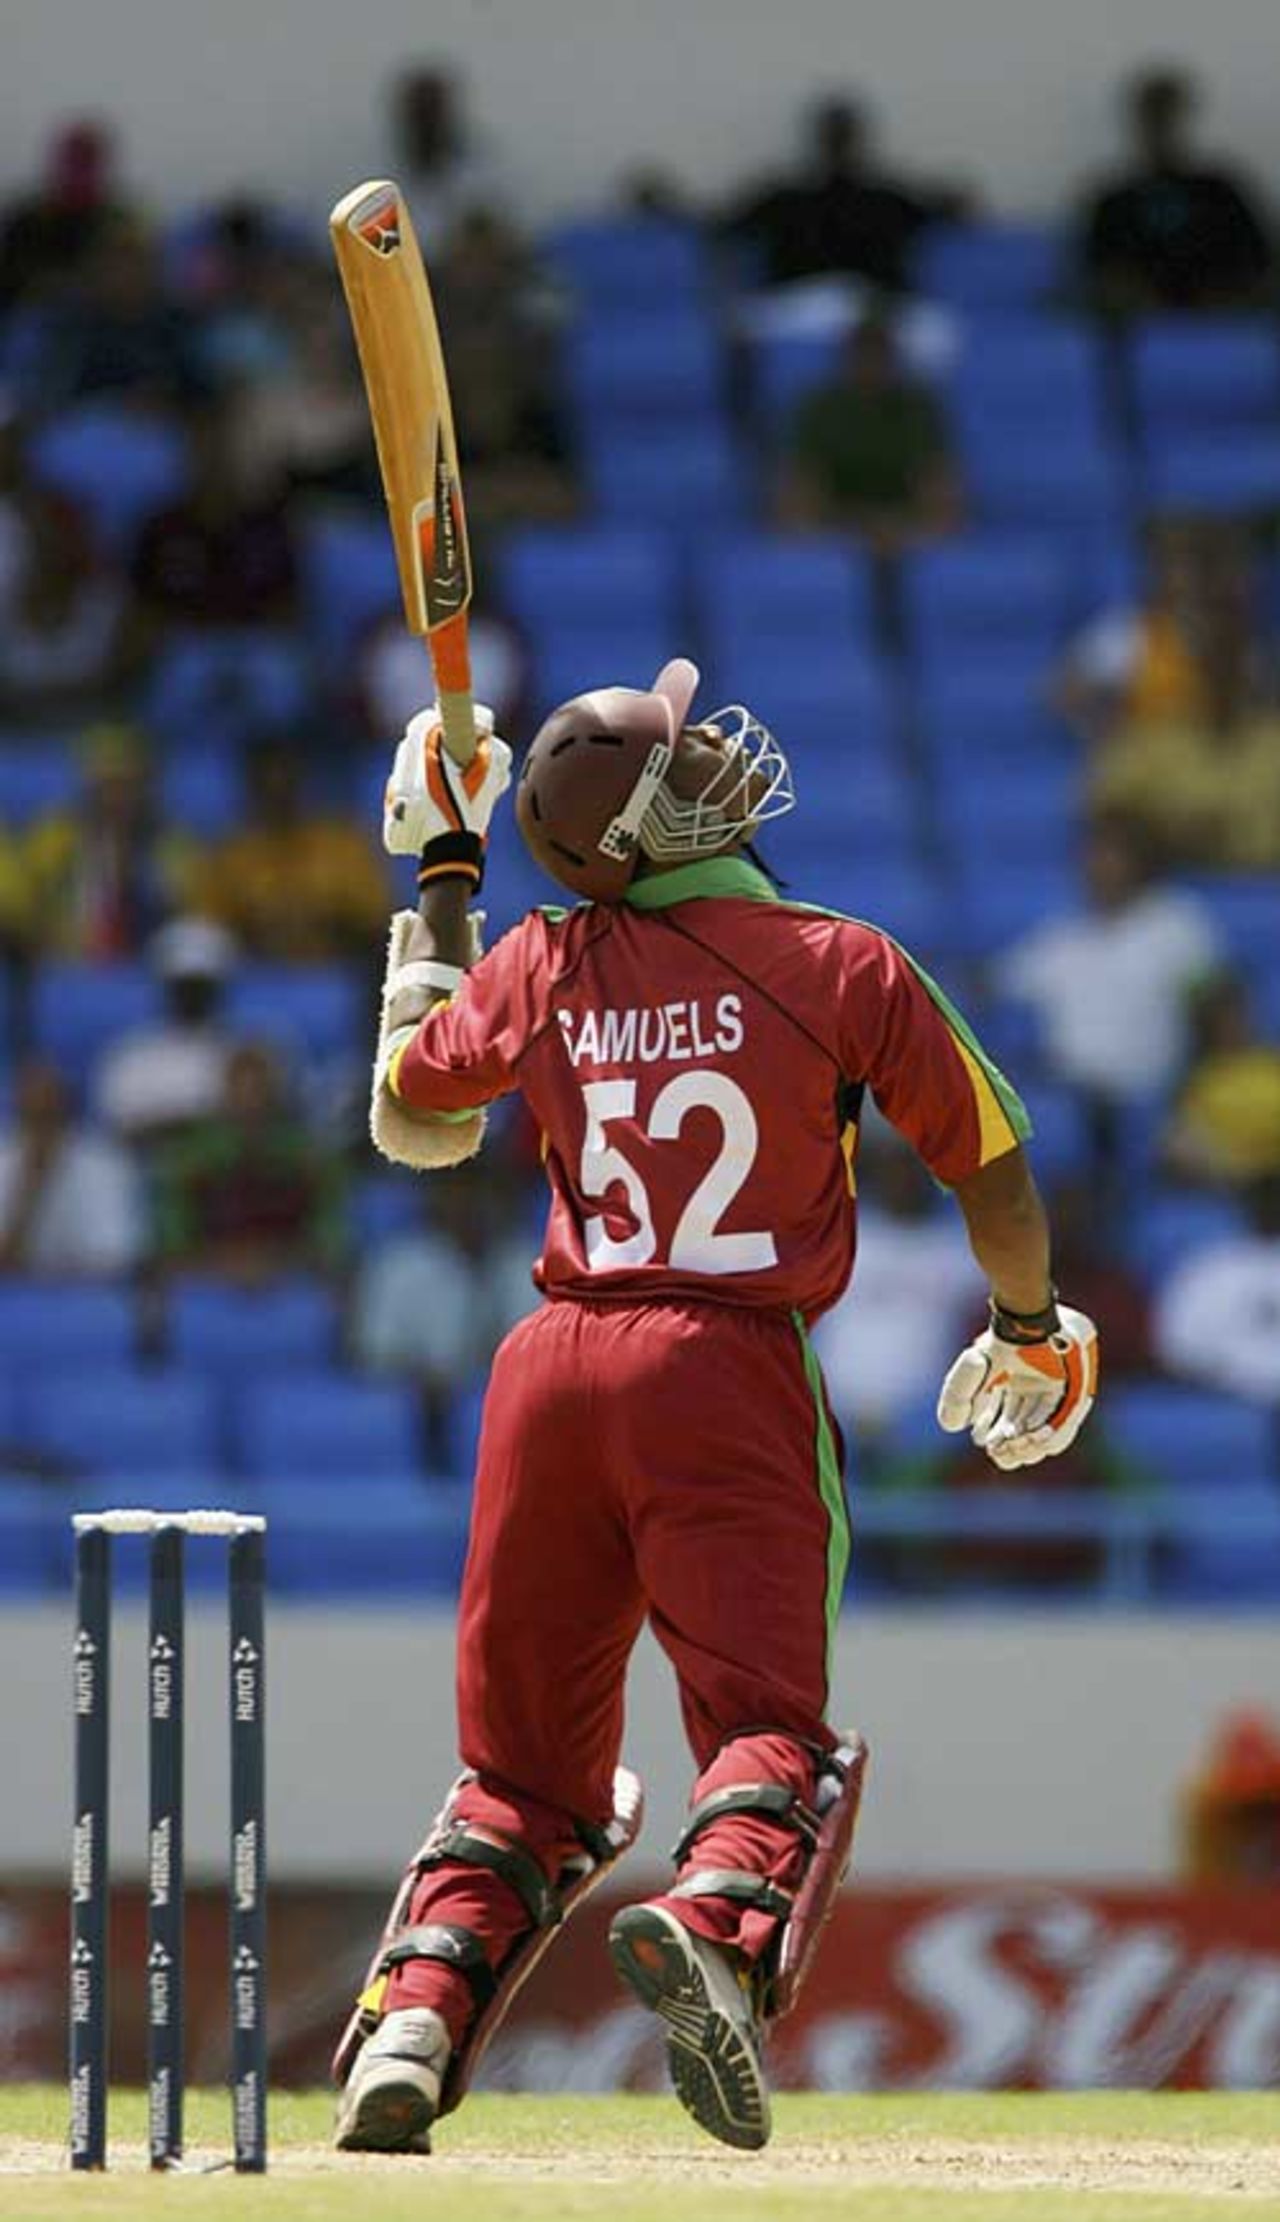 Marlon Samuels loses control and loses his wicket, West Indies v Australia, Super Eights, Antigua, March 28, 2007